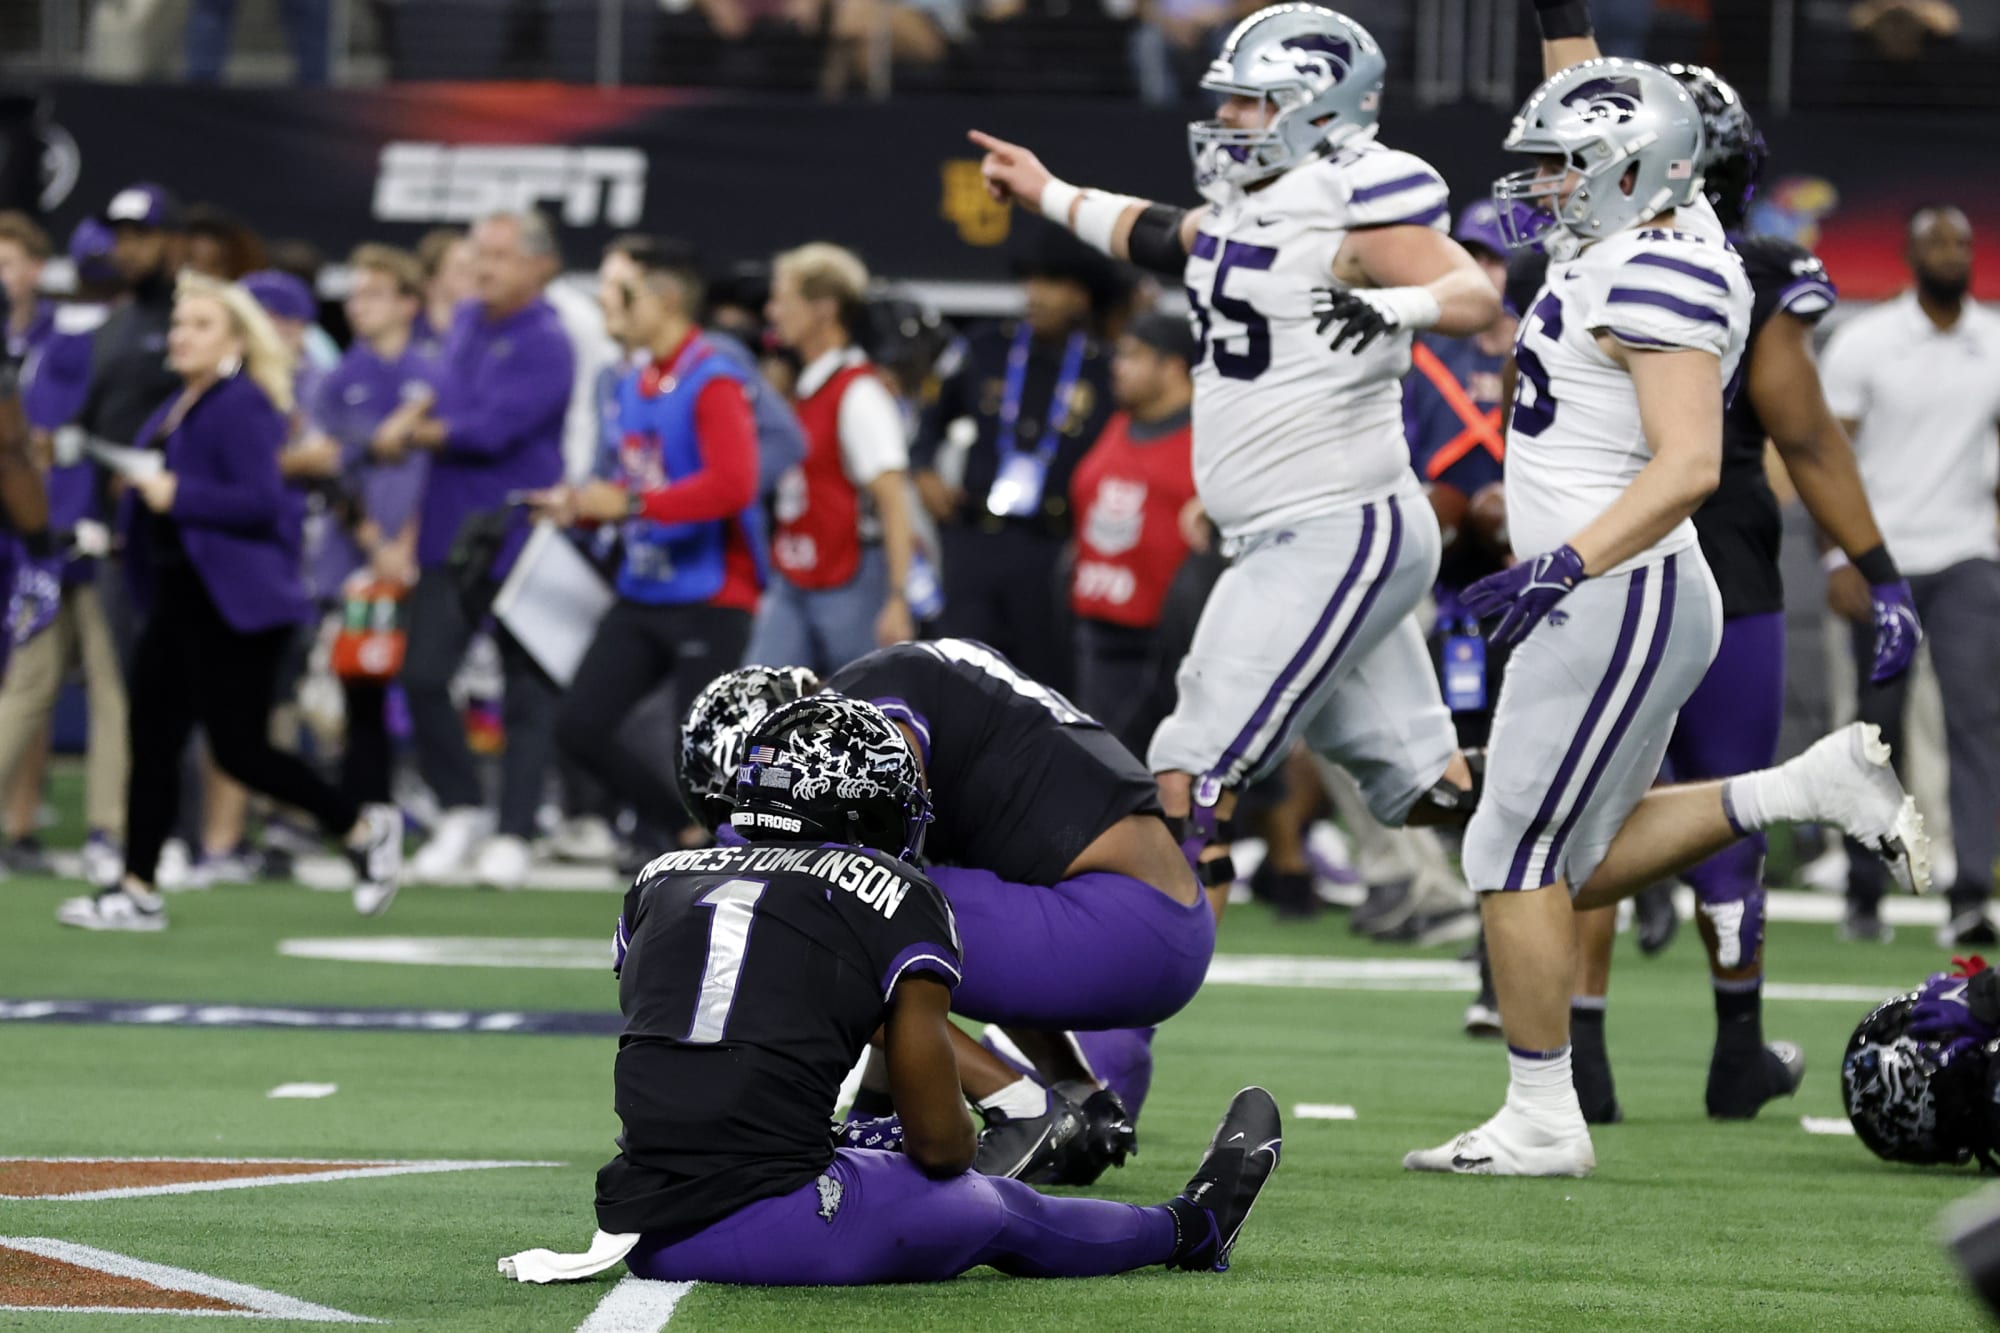 Kansas State weaponizes Hypnotoad against TCU after Big 12 title win